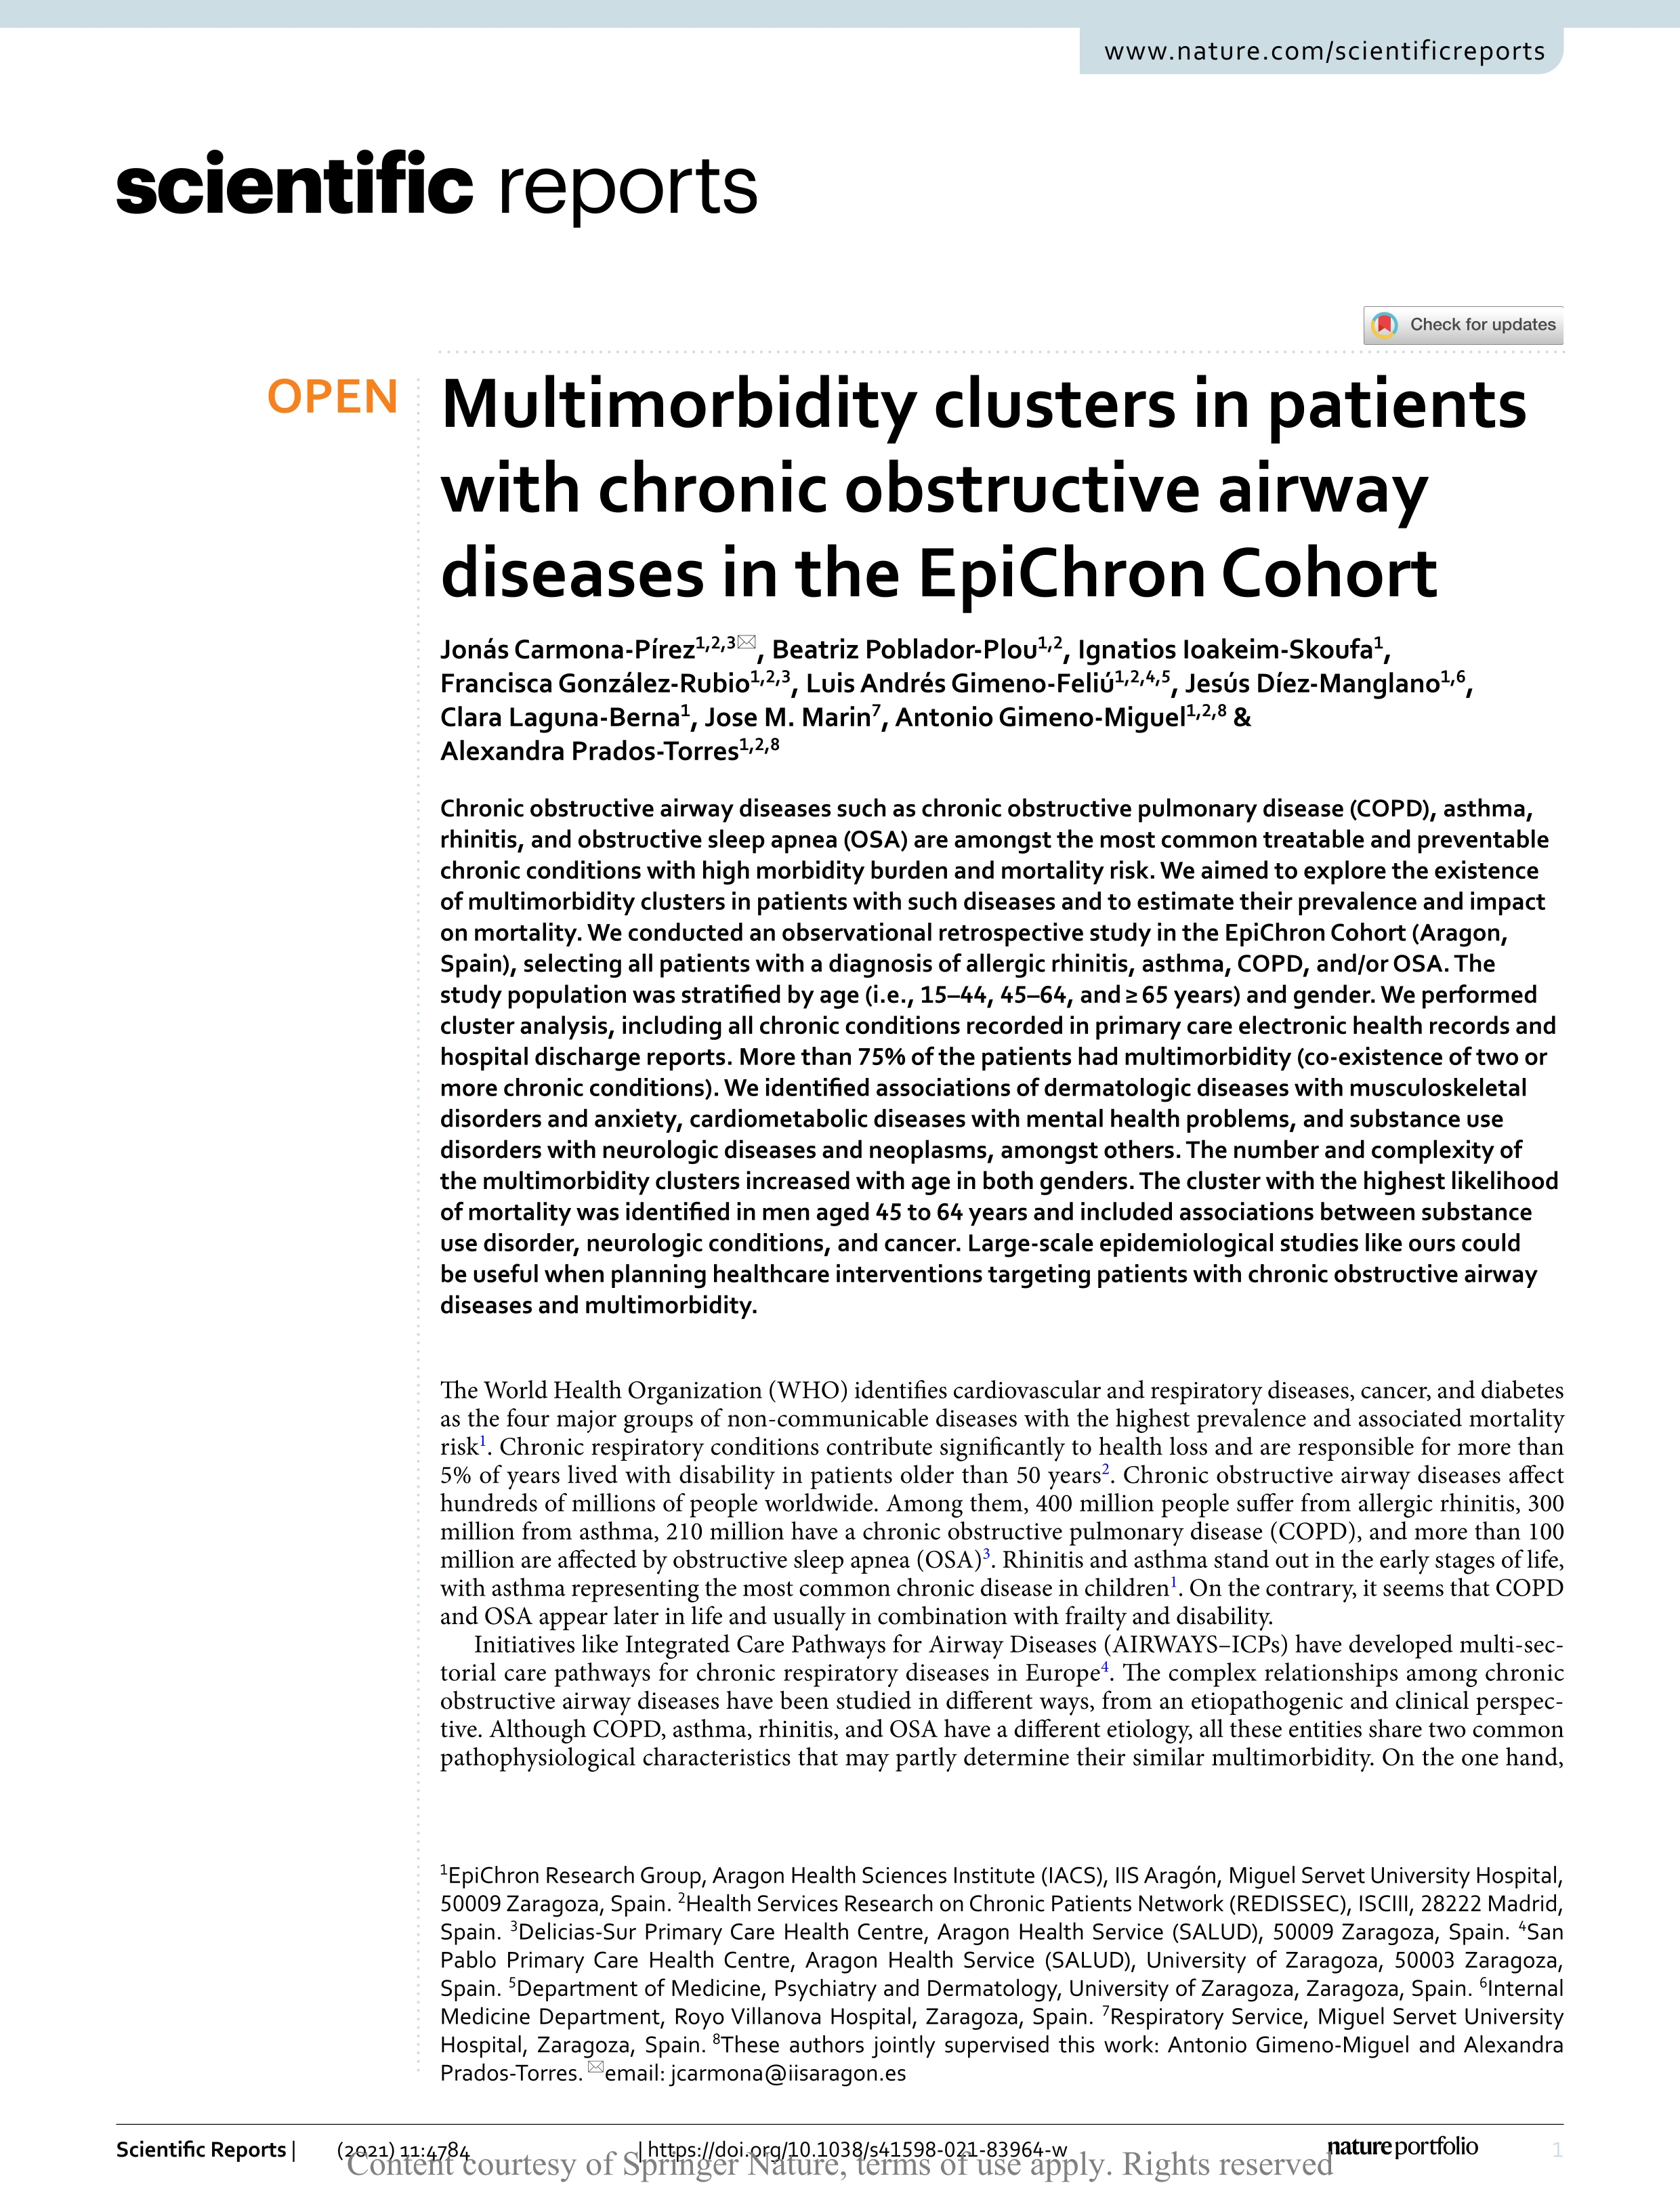 Multimorbidity clusters in patients with chronic obstructive airway diseases in the EpiChron Cohort